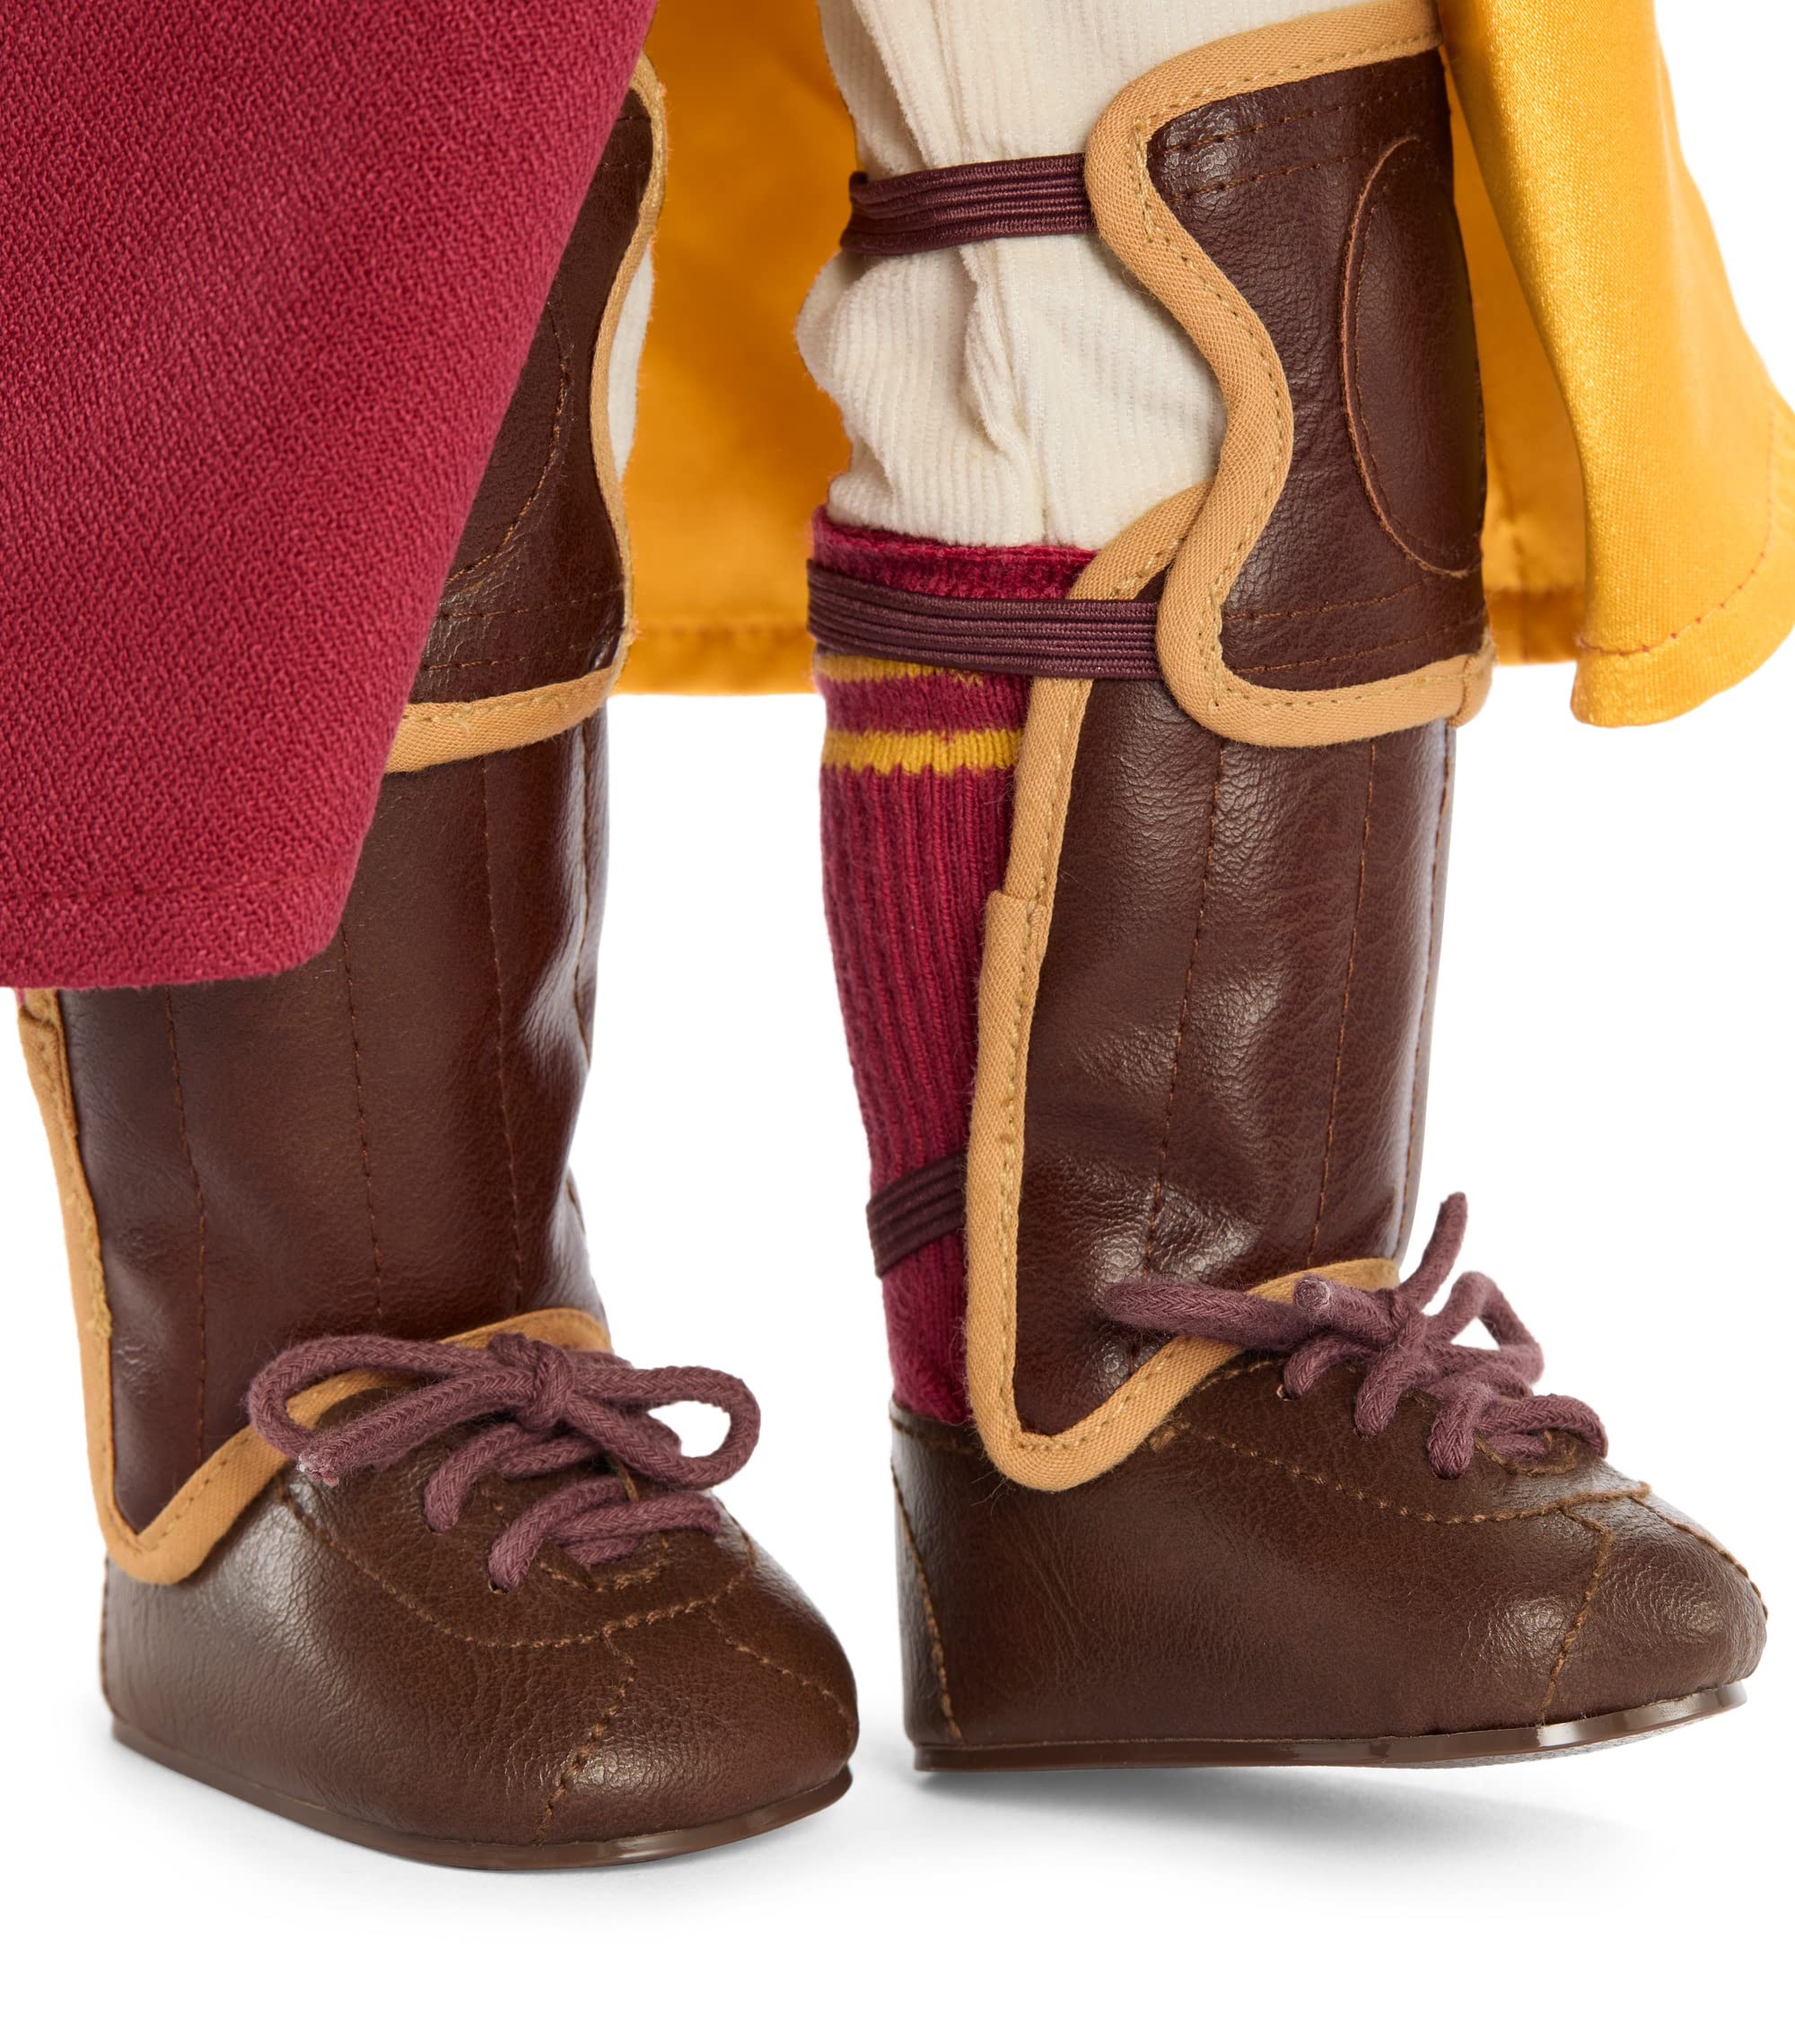 American Girl Harry Potter Gryffindor Quidditch 9-Piece Uniform for 18-inch Dolls with a red Robe, a Sweater, and Corduroy Pants Doll Not Included